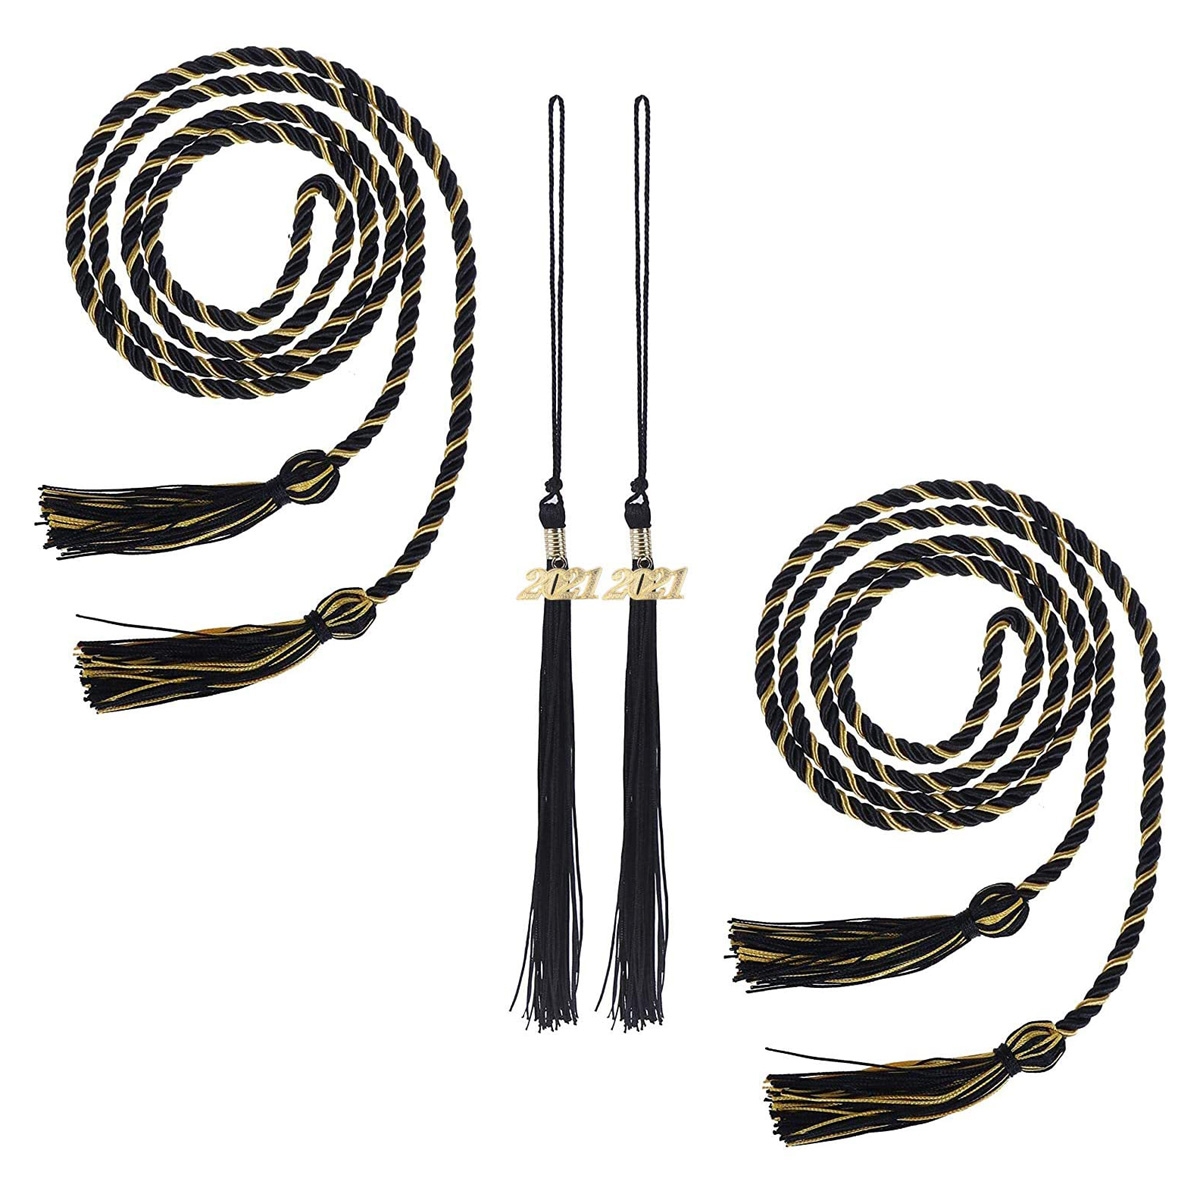 Honor Cord Graduation Decoration Braided Cords with Tassels for High School (Black and Gold) 